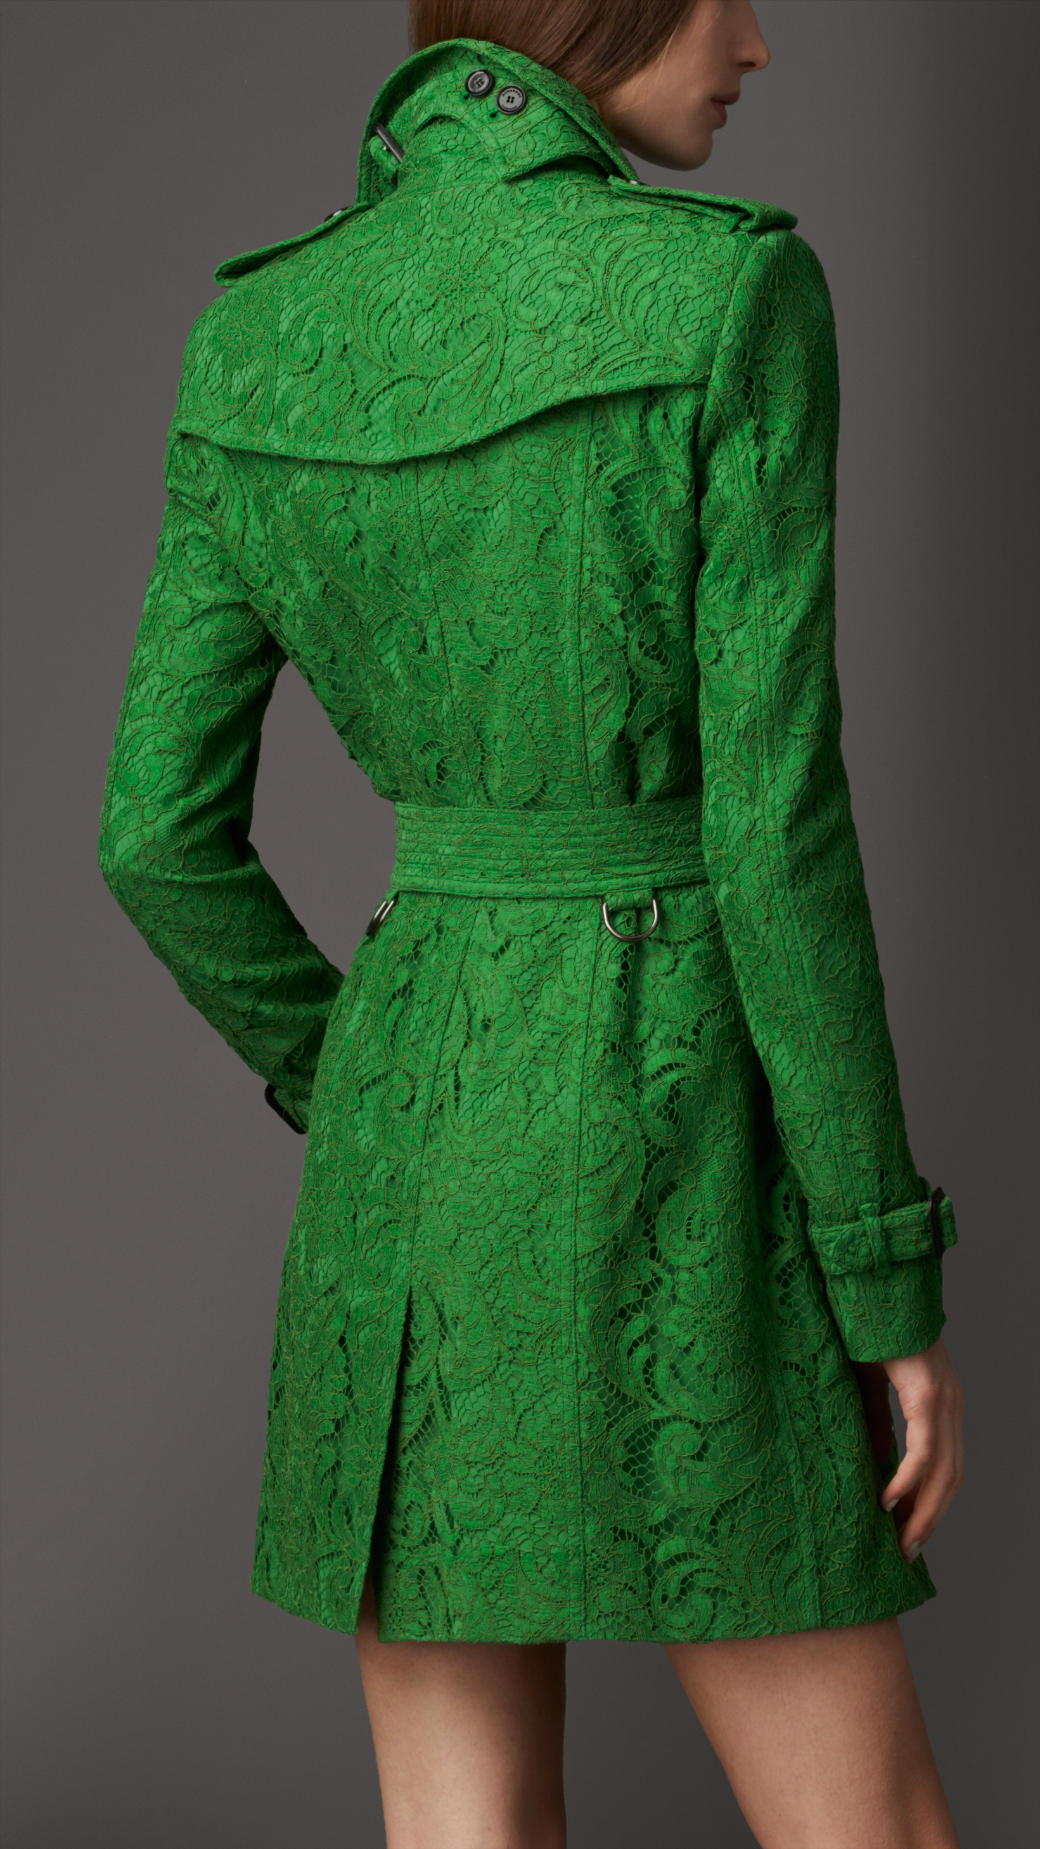 Burberry Midlength Cotton Lace Trench Coat in Bright Green (Green) - Lyst